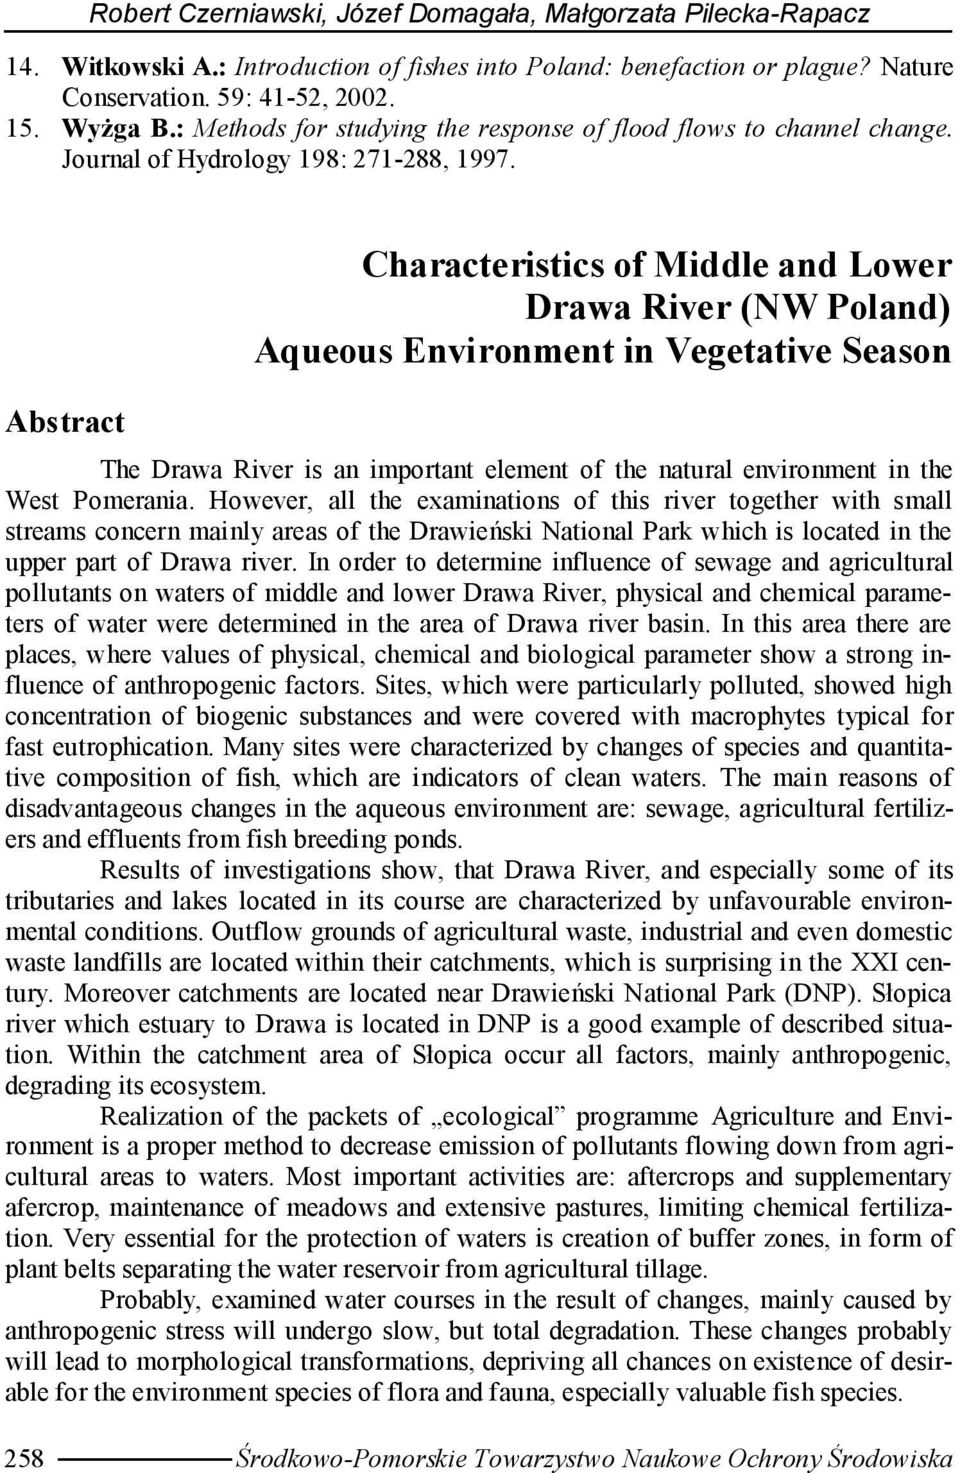 Abstract Characteristics of Middle and Lower Drawa River (NW Poland) Aqueous Environment in Vegetative Season The Drawa River is an important element of the natural environment in the West Pomerania.